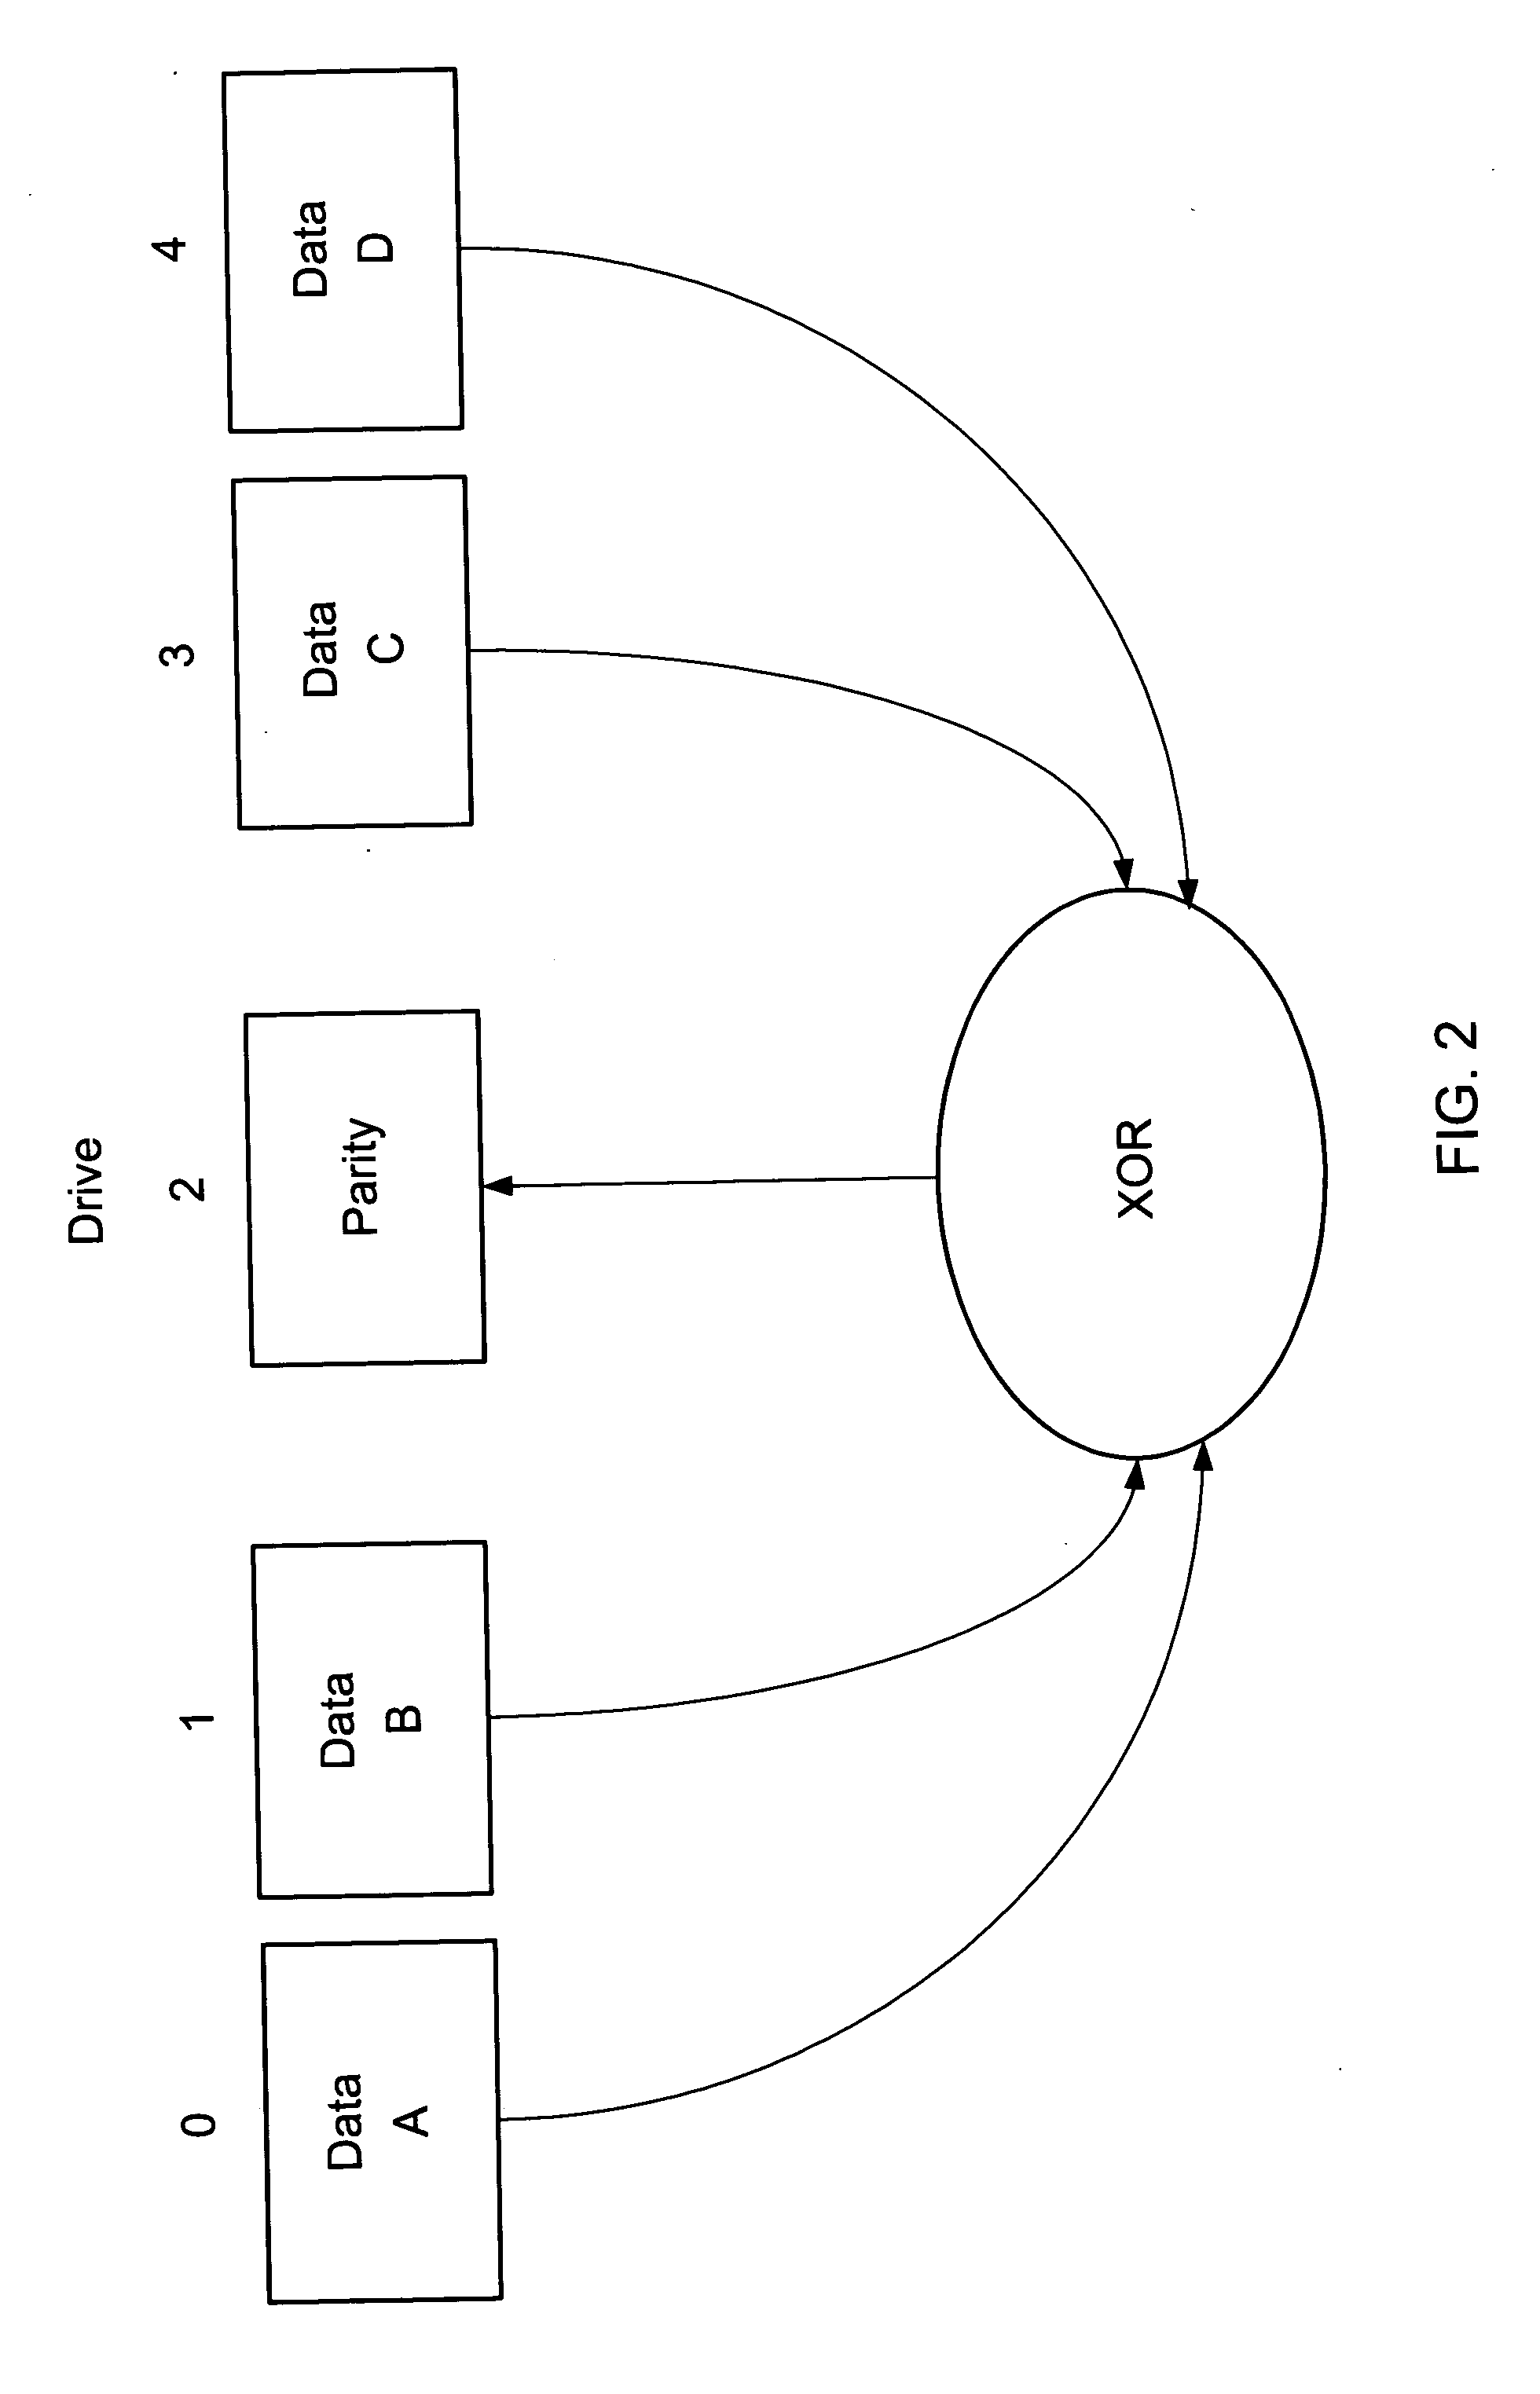 Method for reducing rebuild time on a RAID device